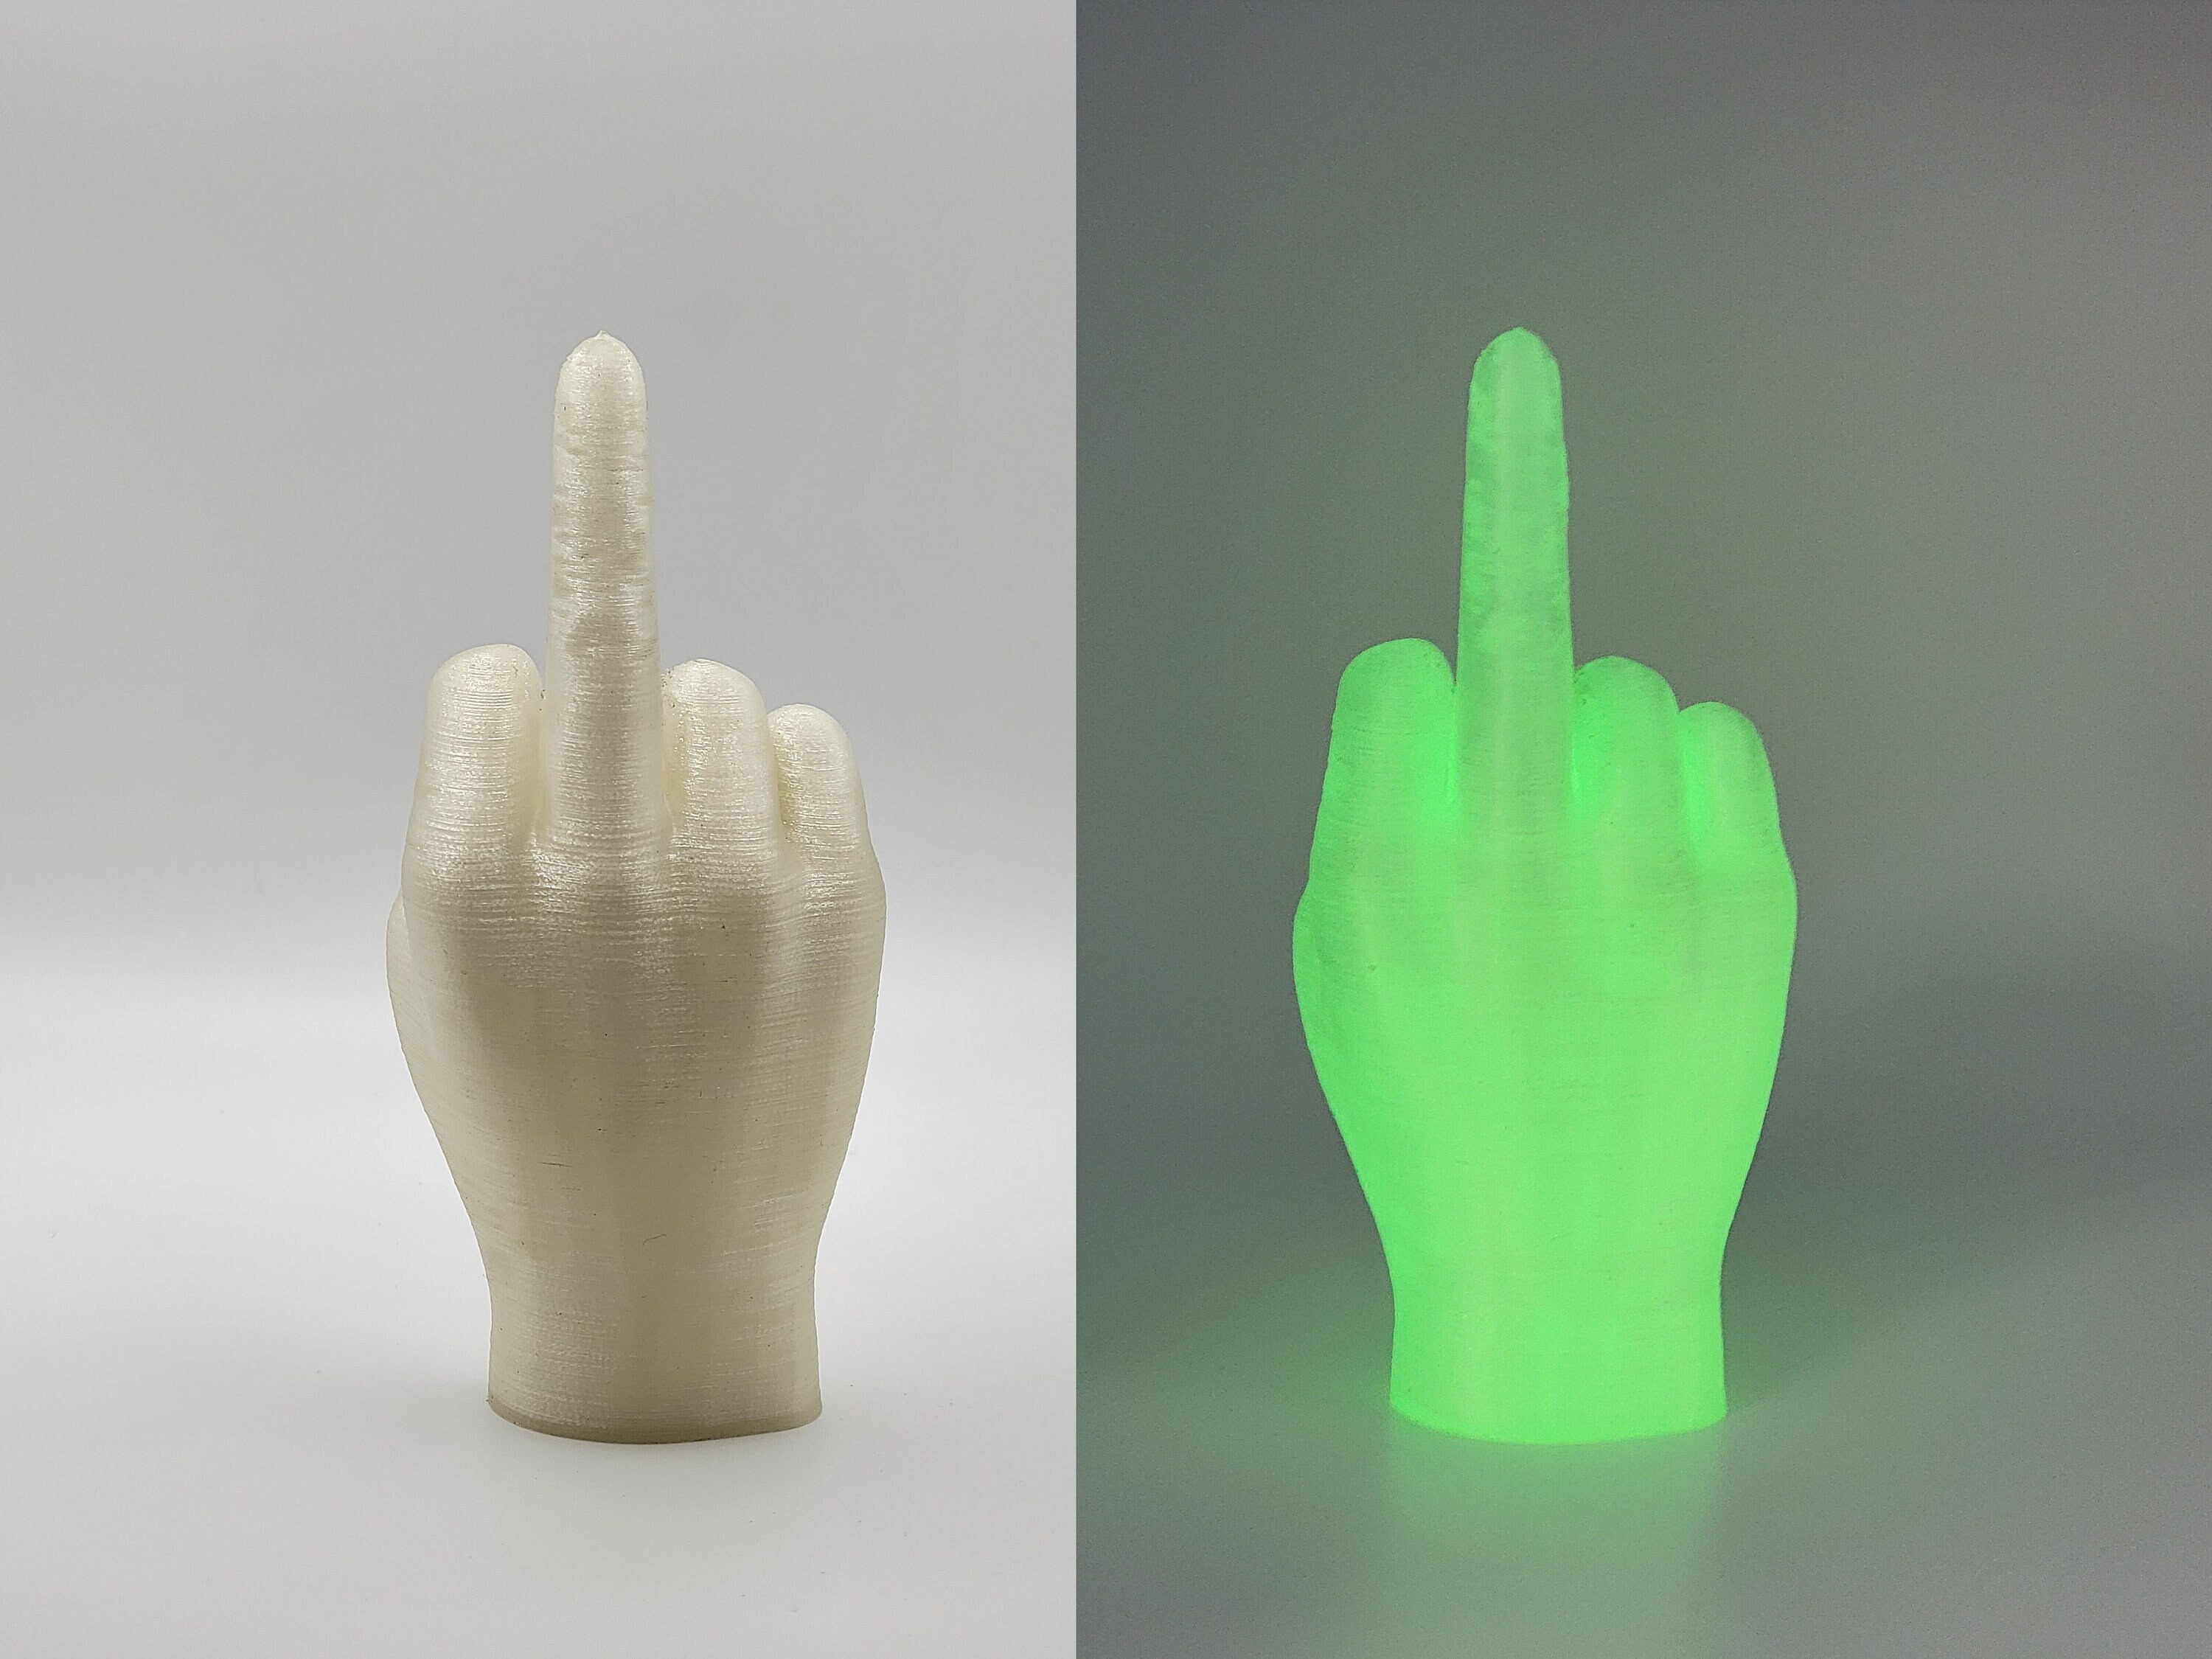 Weird Middle Finger Gifts •